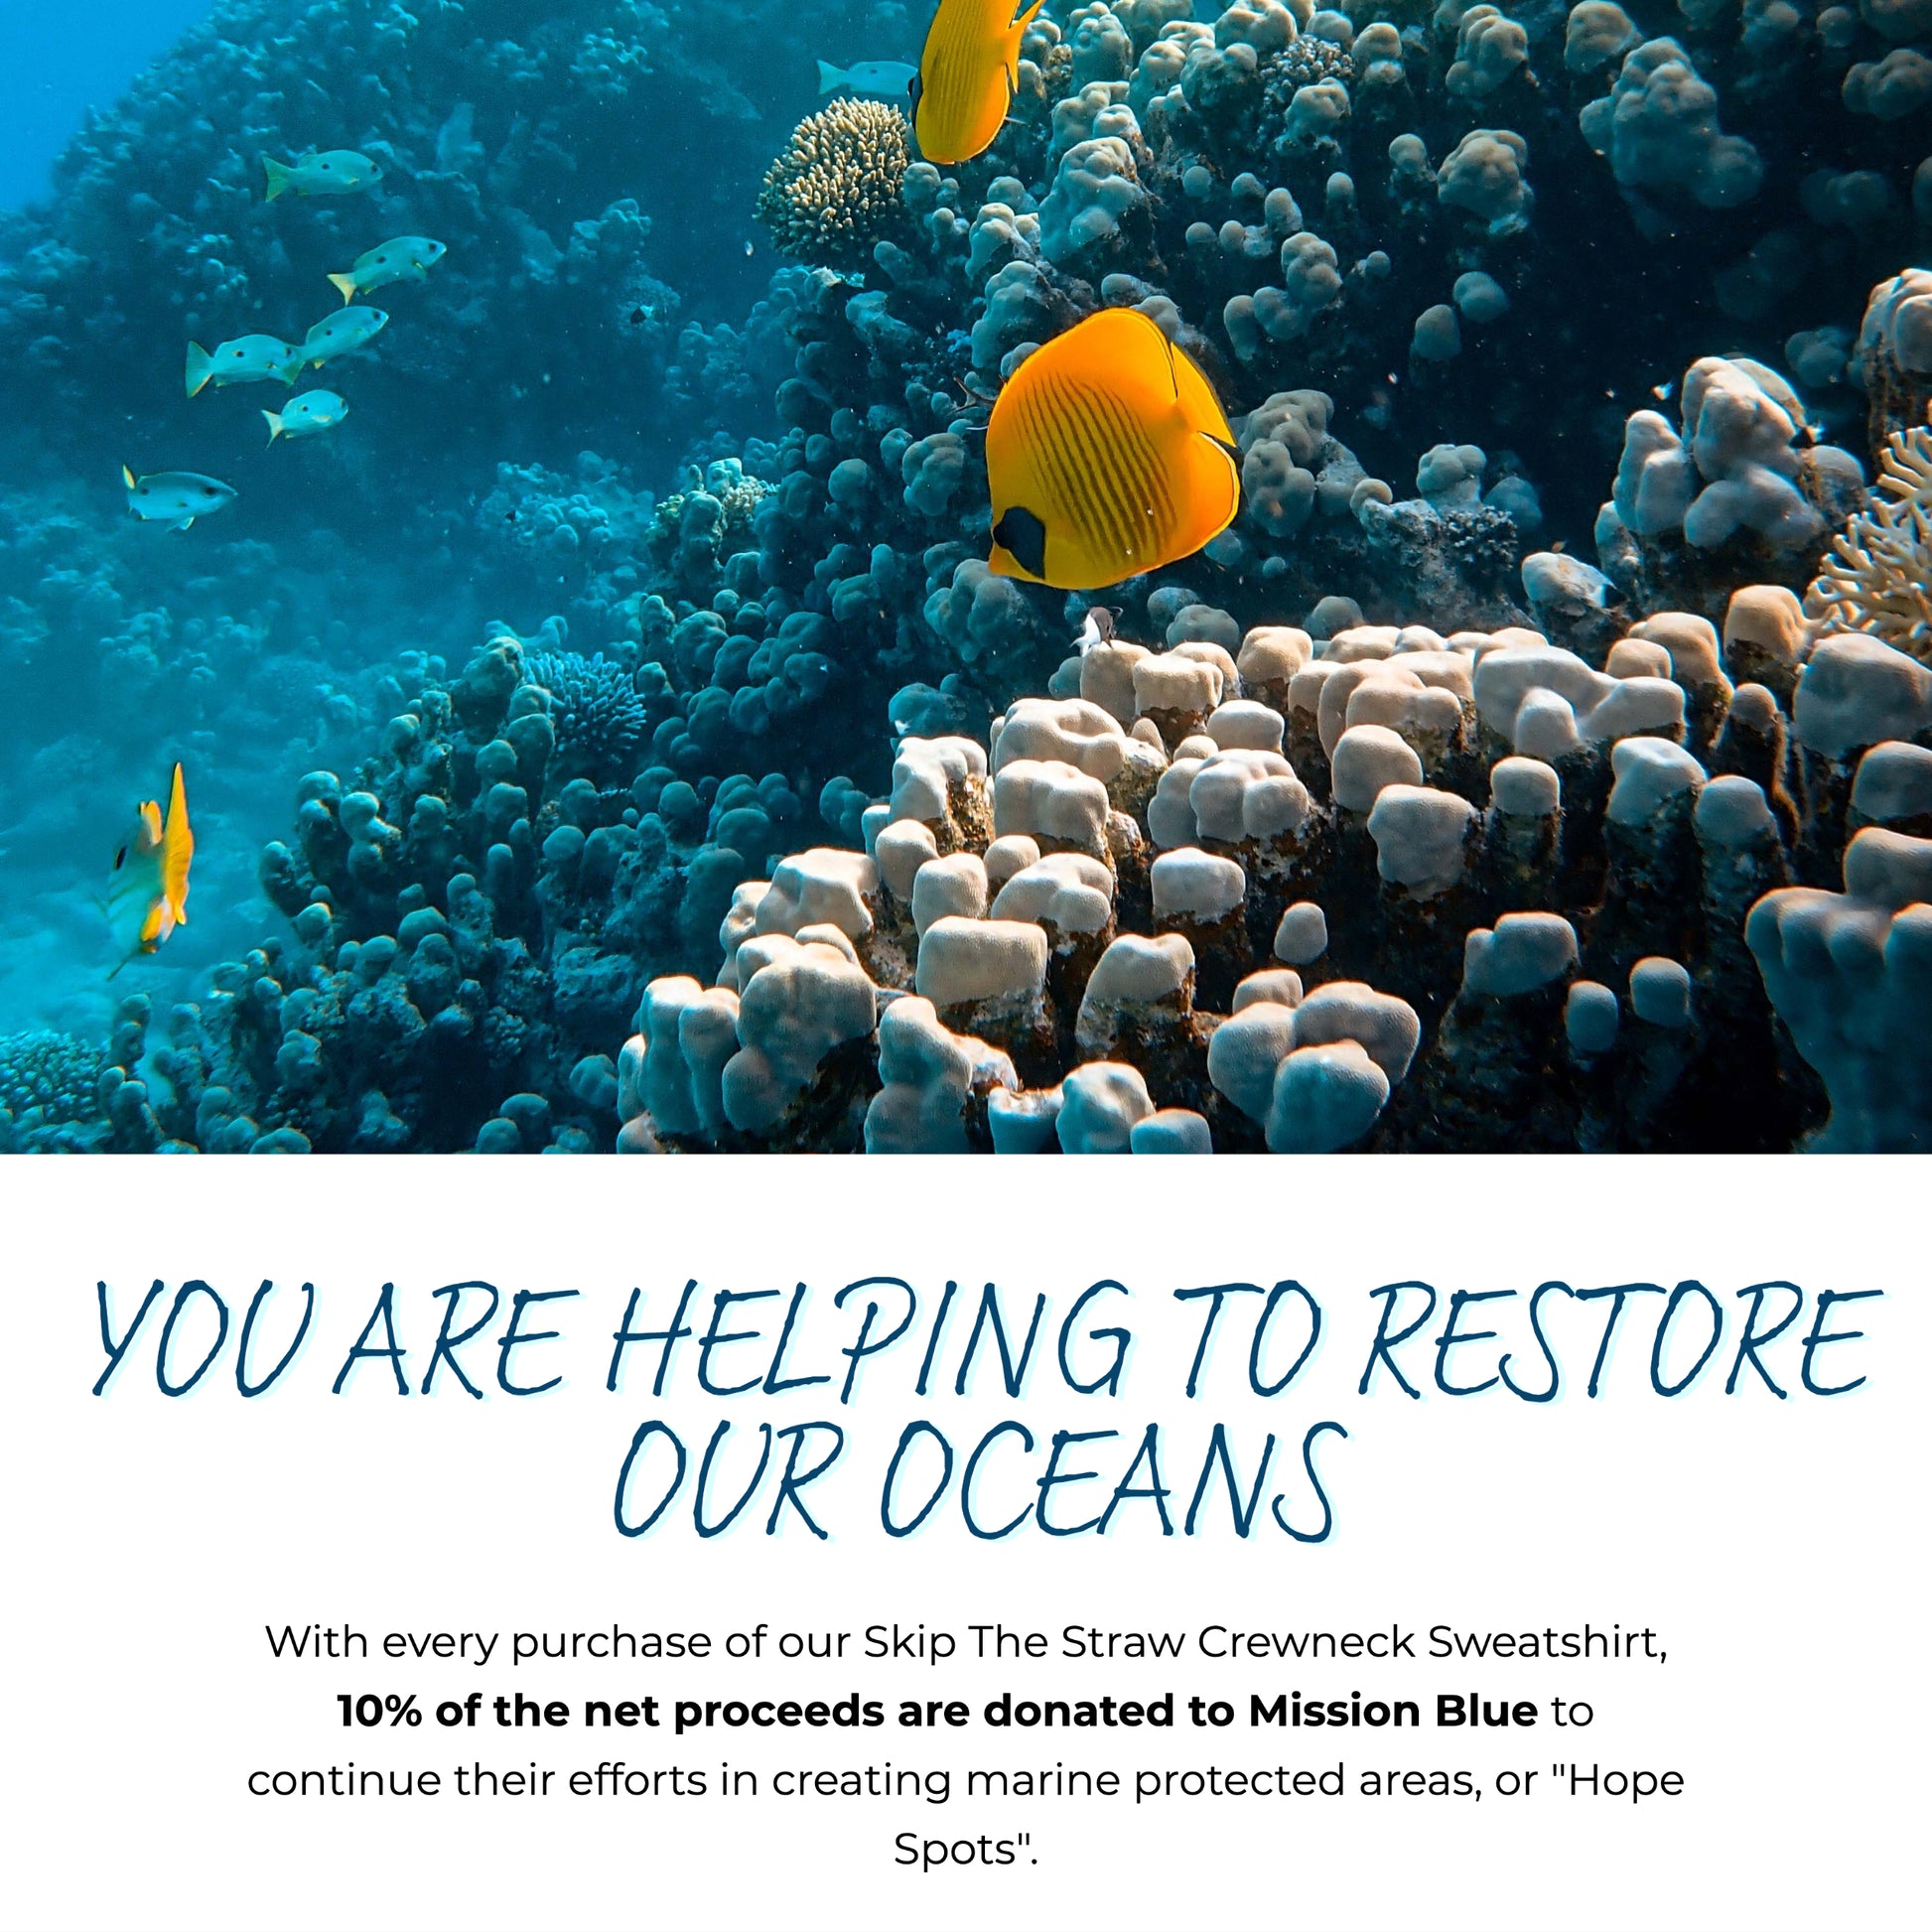 You are helping to restore our oceans. With every purchase of our Skip The Straw Crewneck Sweatshirt, 10% of the net proceeds are donated to Mission Blue to continue their efforts in creating marine protected areas, or "Hope Spots"